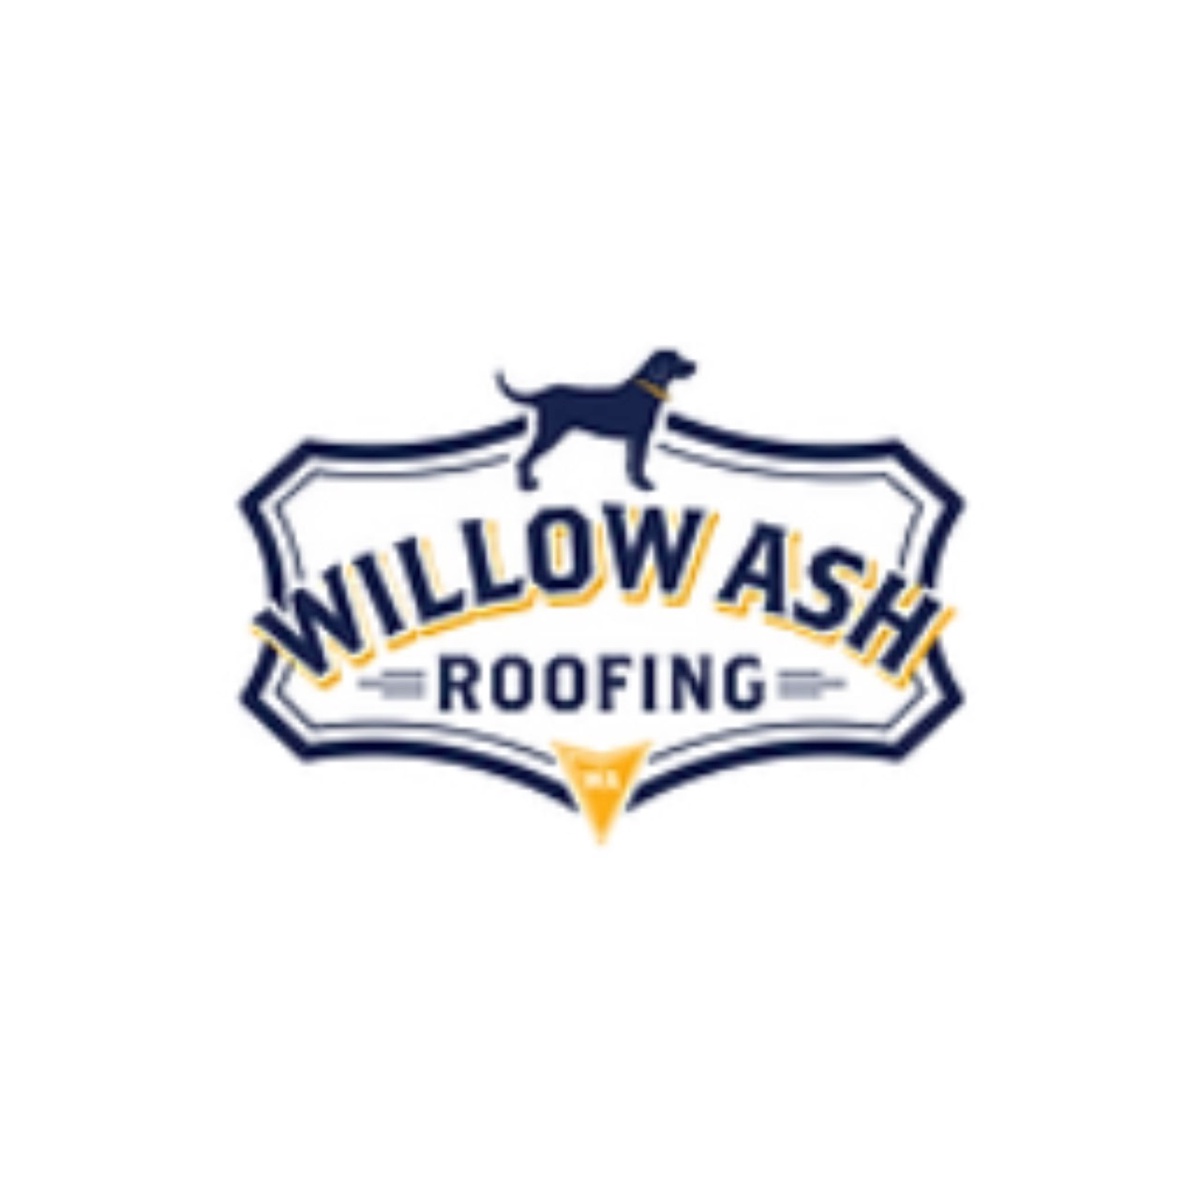 Elevating Roofs, Building Trust: Willow Ash Roofing's Legacy in Charleston, SC